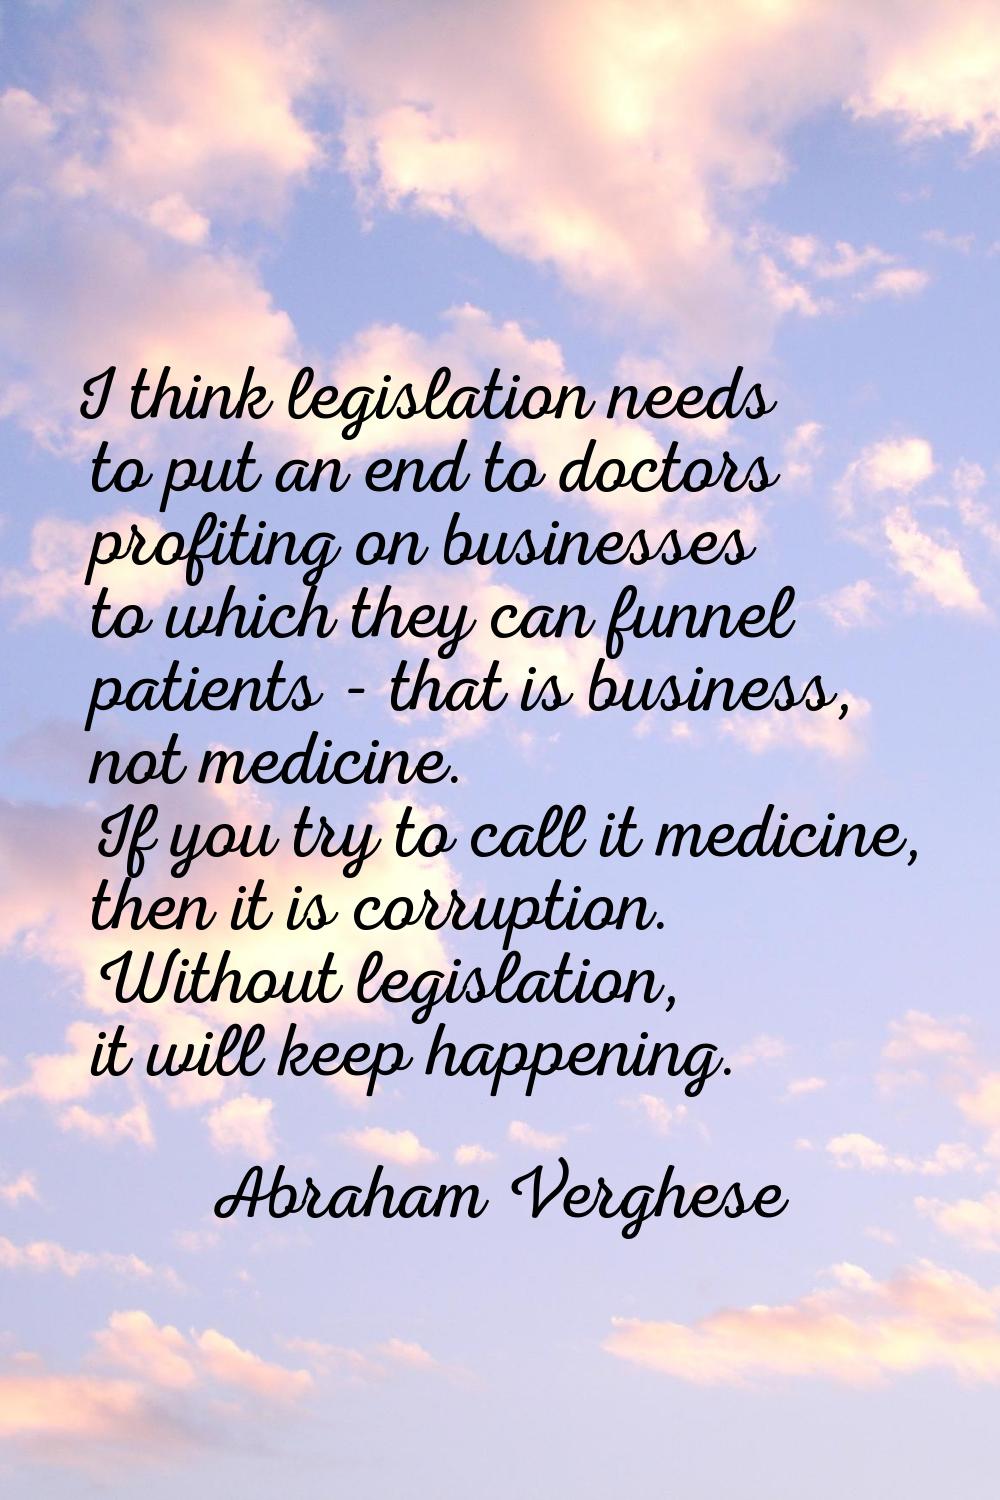 I think legislation needs to put an end to doctors profiting on businesses to which they can funnel